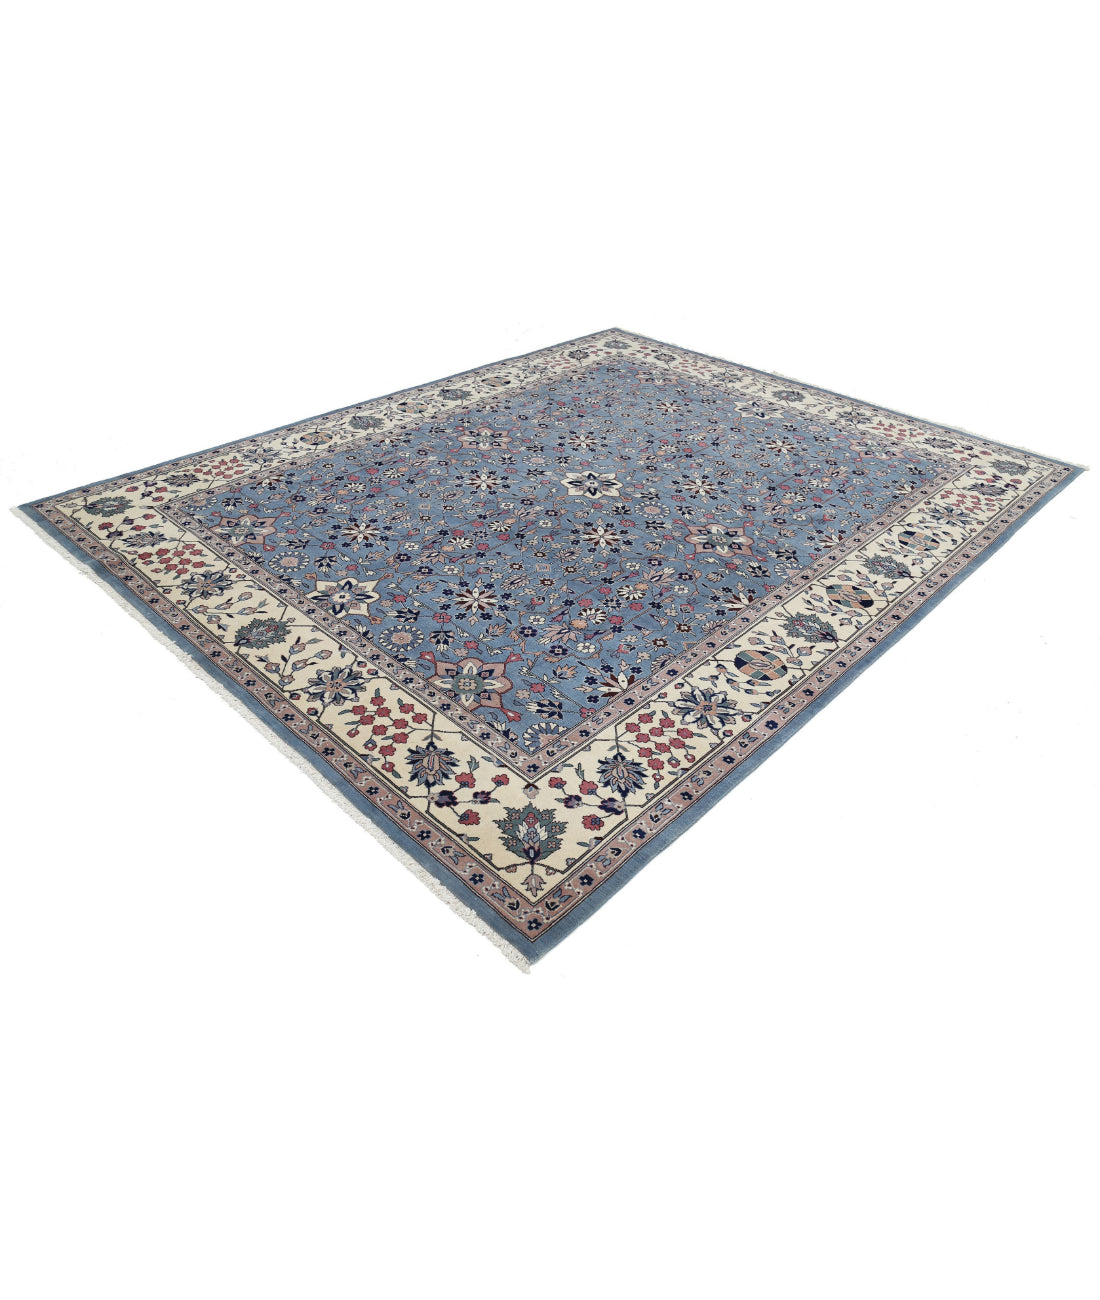 Hand Knotted Heritage Persian Style Wool Rug - 8'1'' x 10'1'' 8'1'' x 10'1'' (243 X 303) / Blue / Ivory